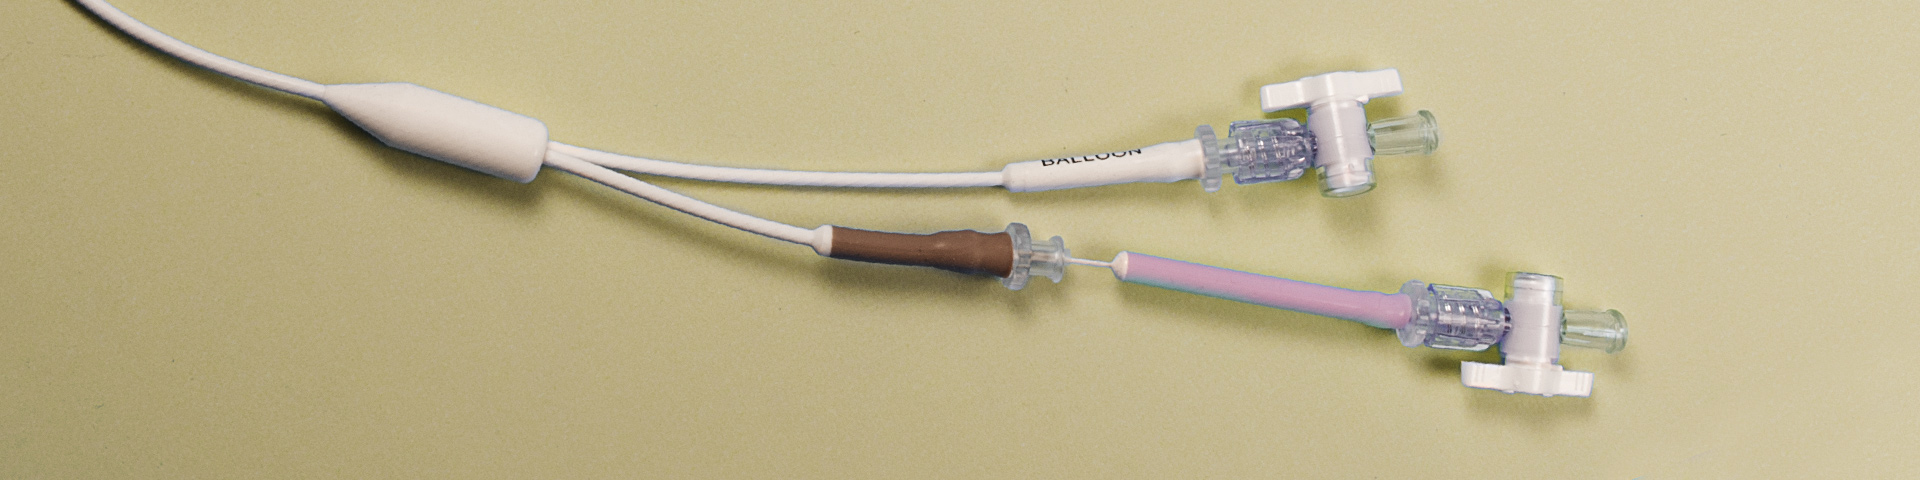 services-catheters-and-shunts